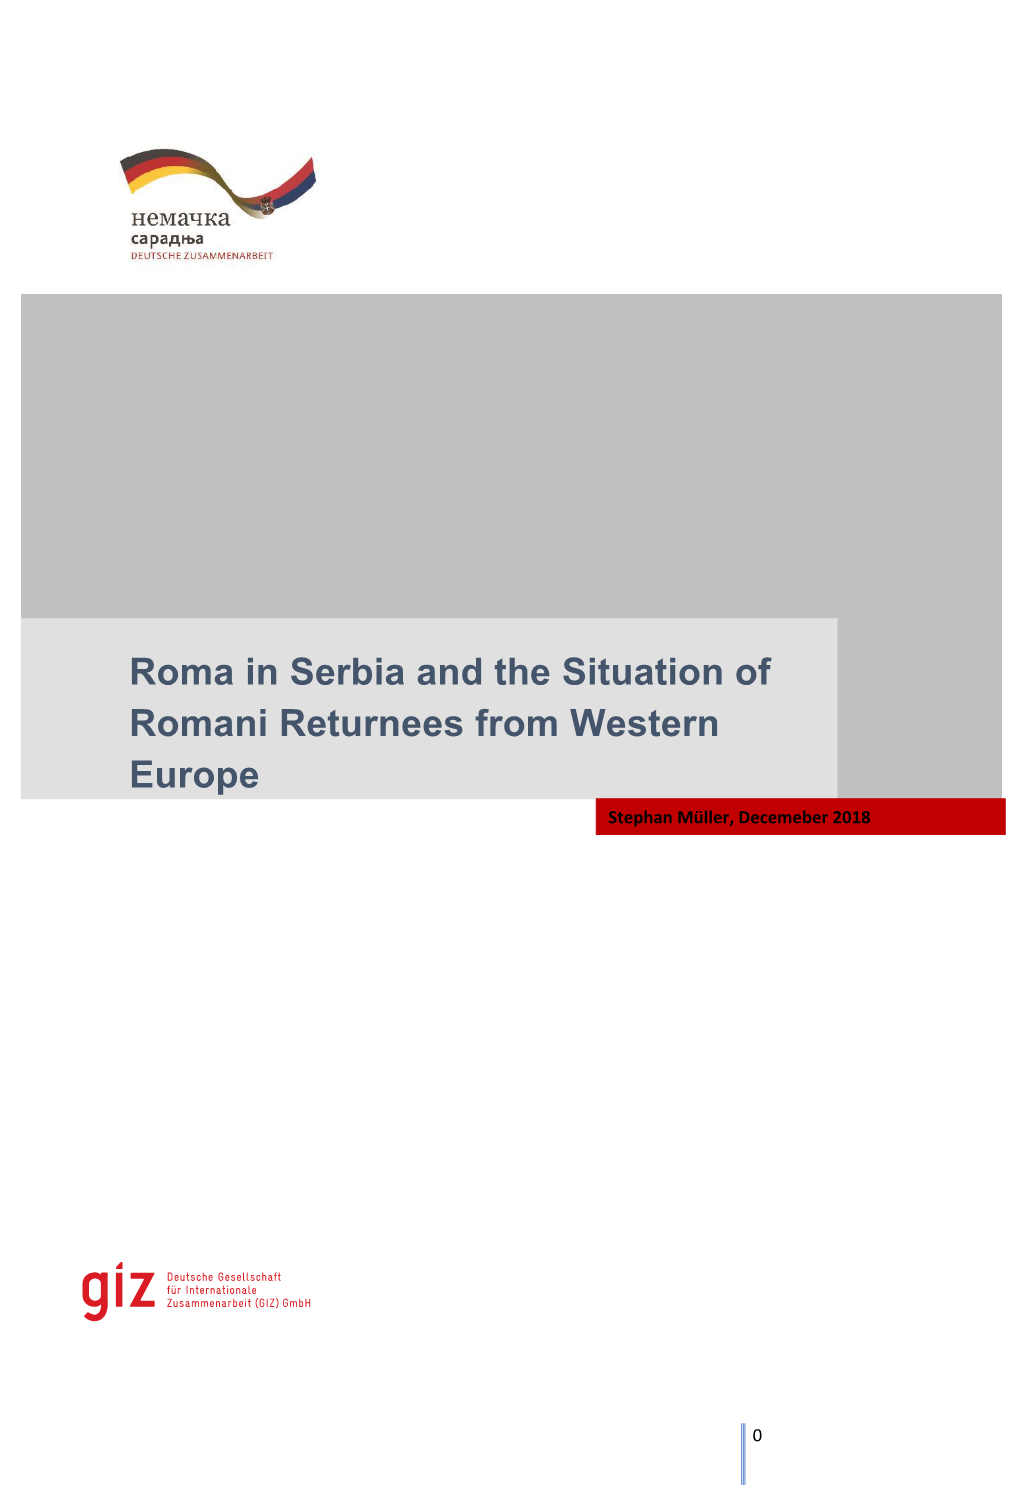 Roma in Serbia and the Situation of Romani Returnees from Western Europe Stephan Müller, Decemeber 2018